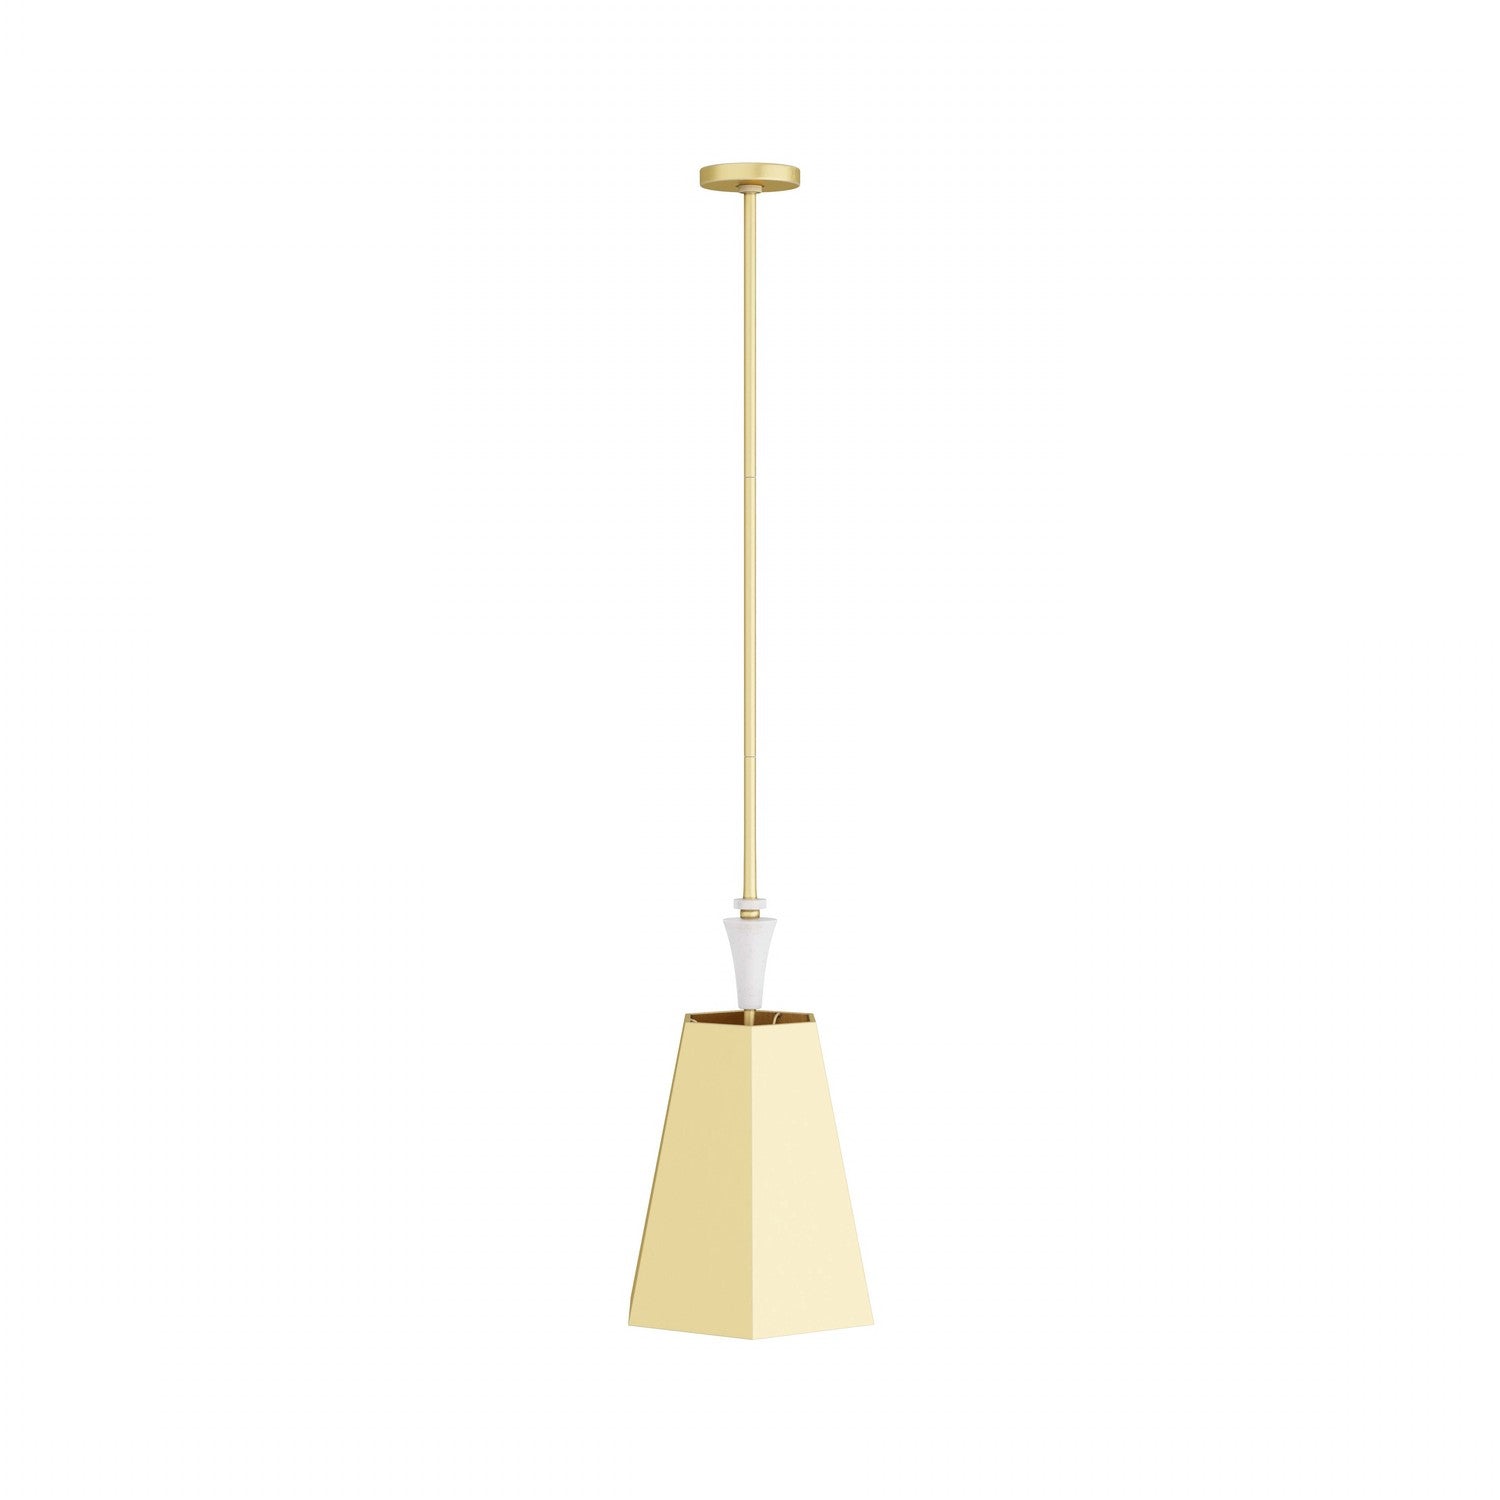 One Light Pendant from the Teagan collection in Antique Brass finish